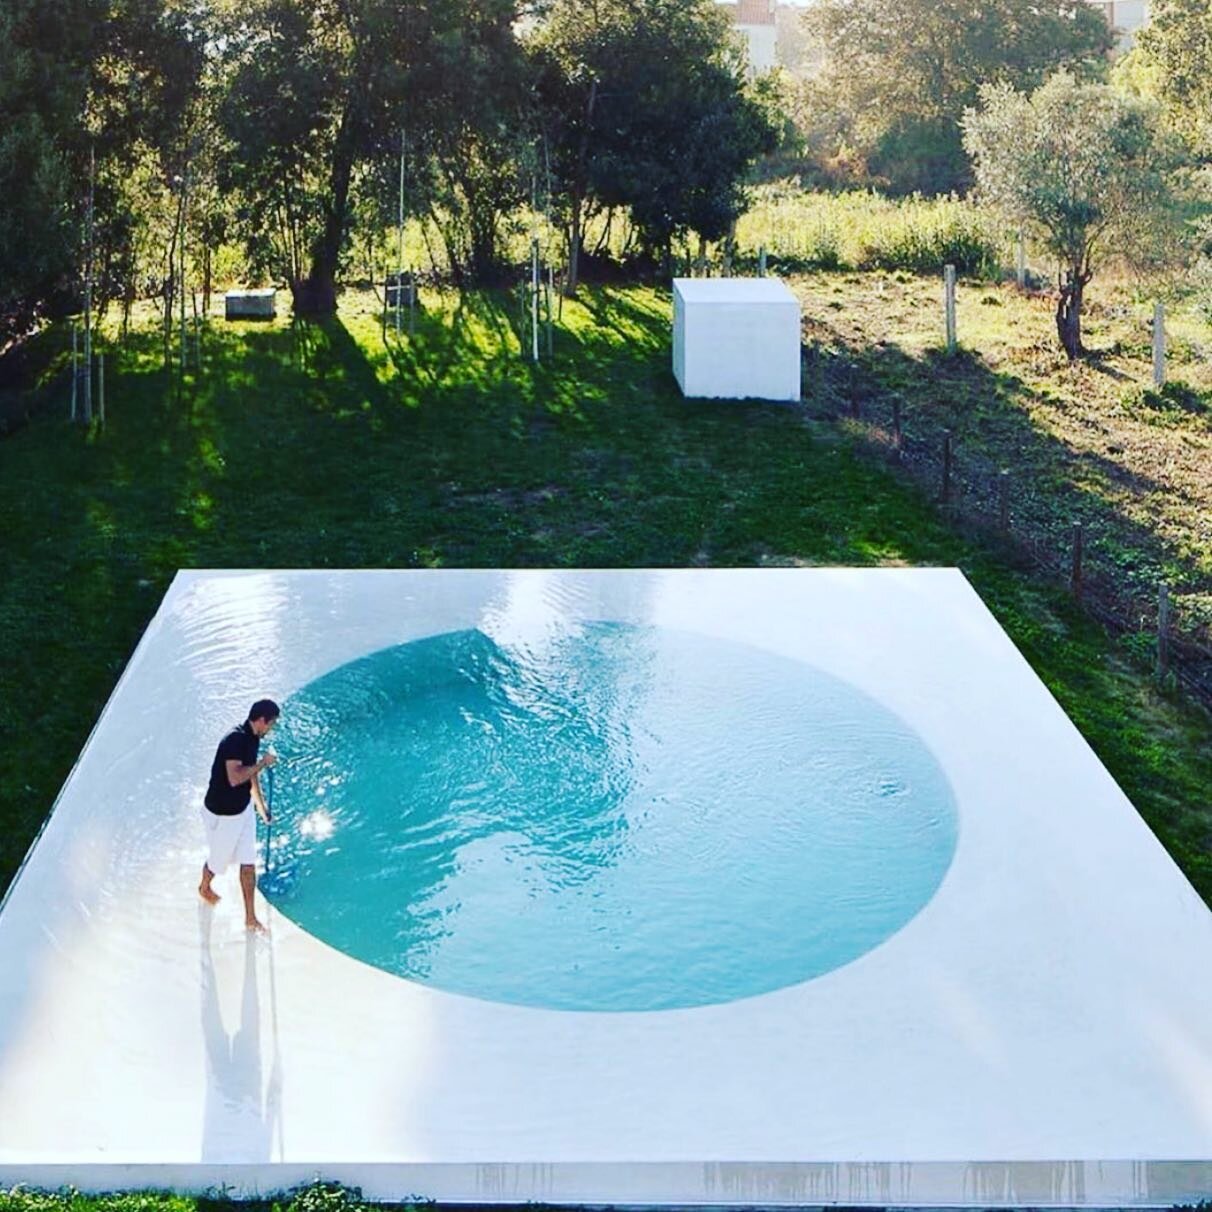 Mmmm good different &lsquo;alfif house&rsquo; design@Guilhermachadova #pool ##poolside #pool #summer #swimmingpool #pooltime #poolparty #swimming #pooldesign #pools #summervibes #travel #vacation #poolday #poollife #poolsofinstagram #summertime #pool